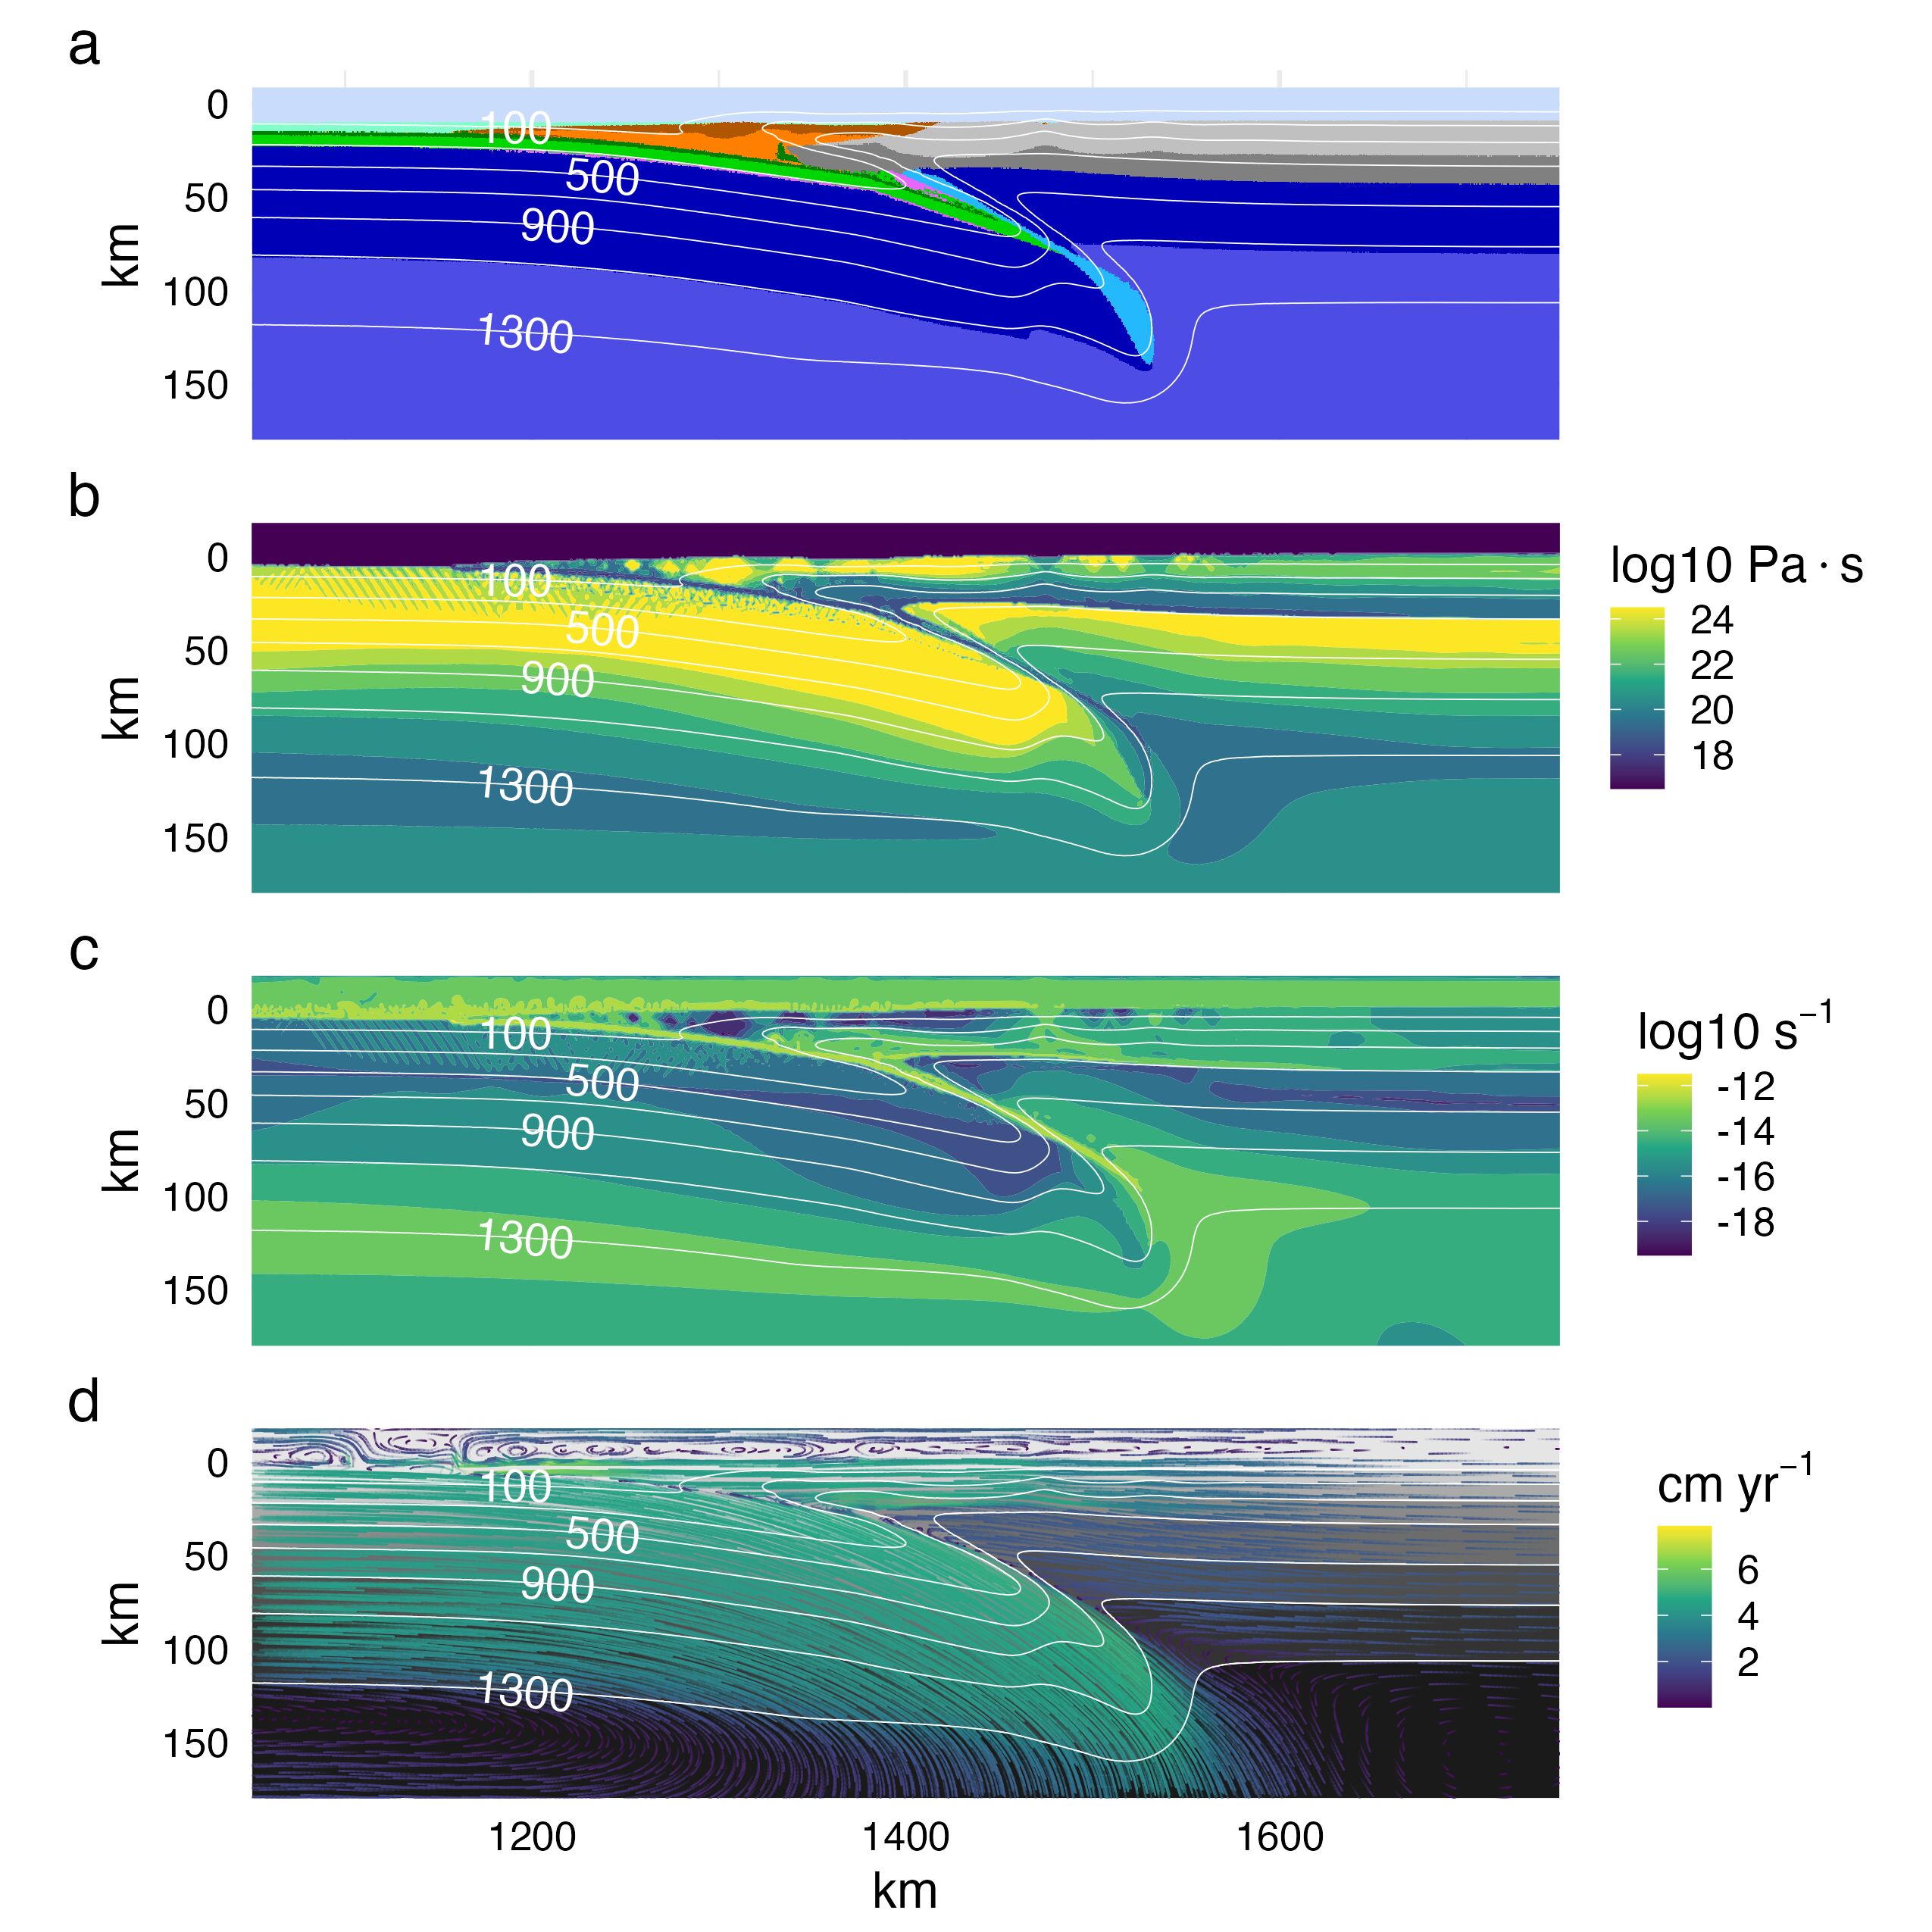 Visualizing model cdf with $Z_{UP}$ = 78 km at 1.64 Ma. (a) Rock type. (b) Temperature. (c) Viscosity. (d) Streamlines. Early subduction is facilitated by the prescribed initial weak layer cutting the lithosphere. Strain is localized in the weak serpentine layer along the plate interface. The shallow upper-plate mantle is stagnant and loses heat to the subducting plate, promoting serpentine stabiliization to greater depths. Rock type colors are the same as Figure \@ref(fig:init).